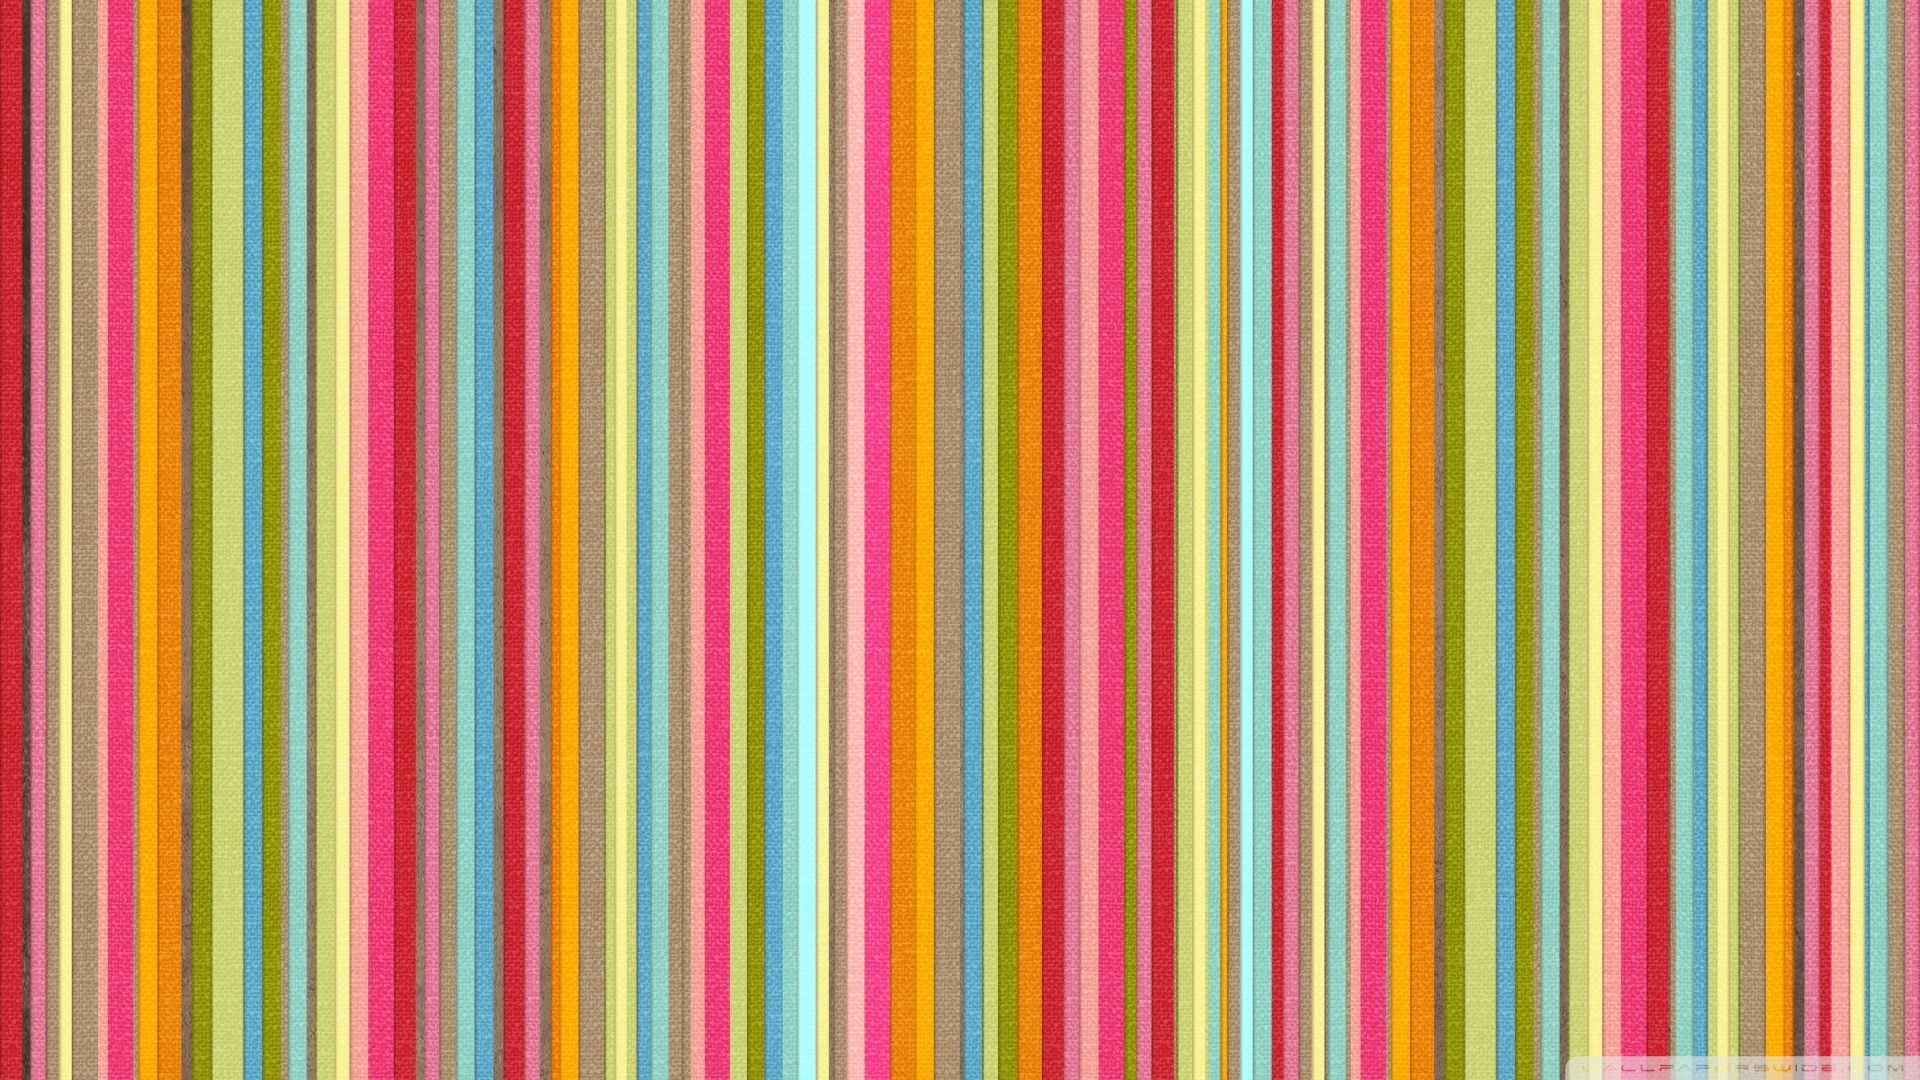 Wallpaper stripes striped images - 1107858